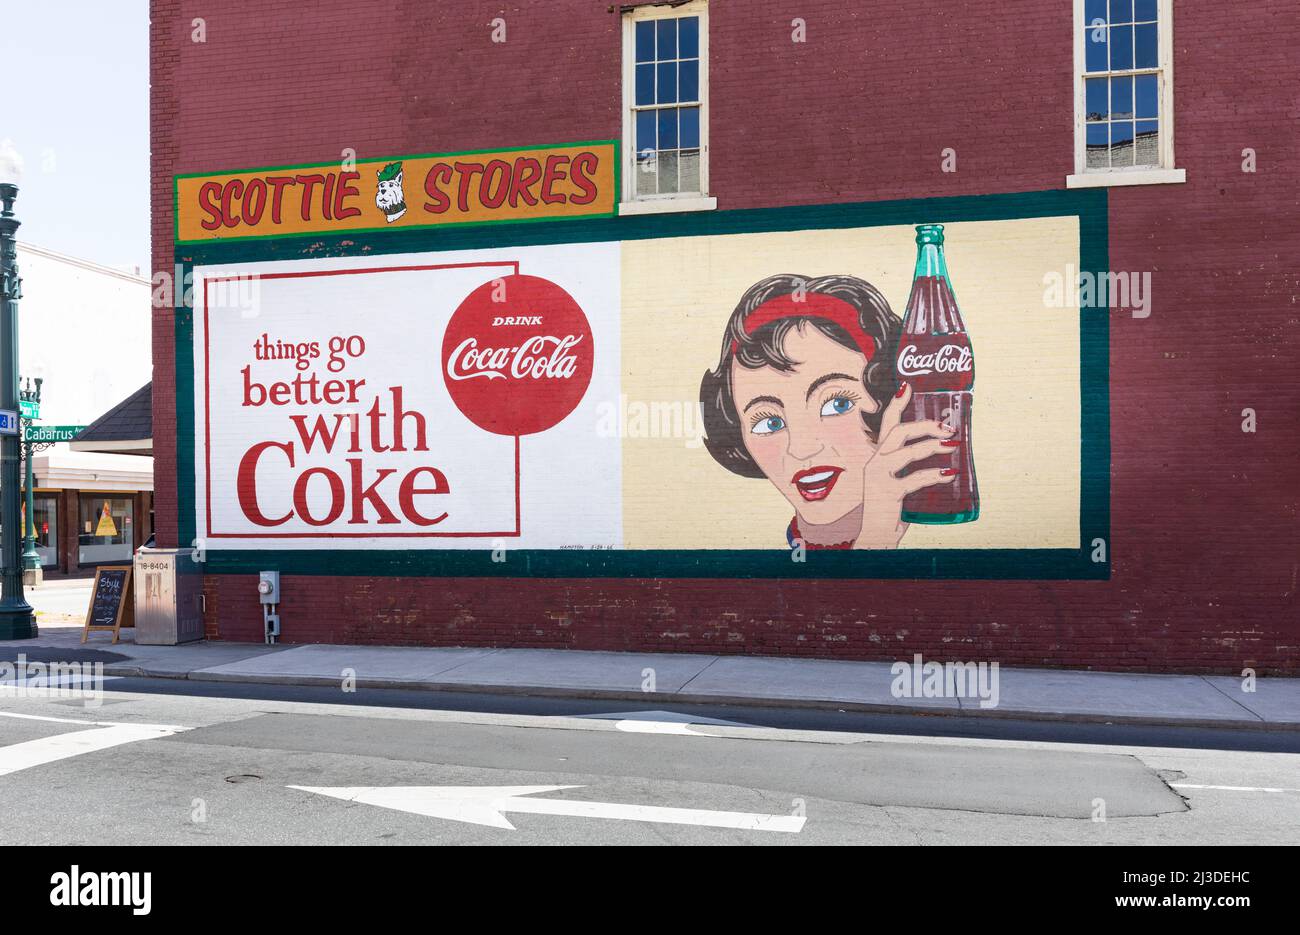 CONCORD, NC, USA-3 APRIL 2022: An historic Coca-Cola advertising sign on a brick building wall, also advertising Scottie Stores.   Signed by Hampton, Stock Photo